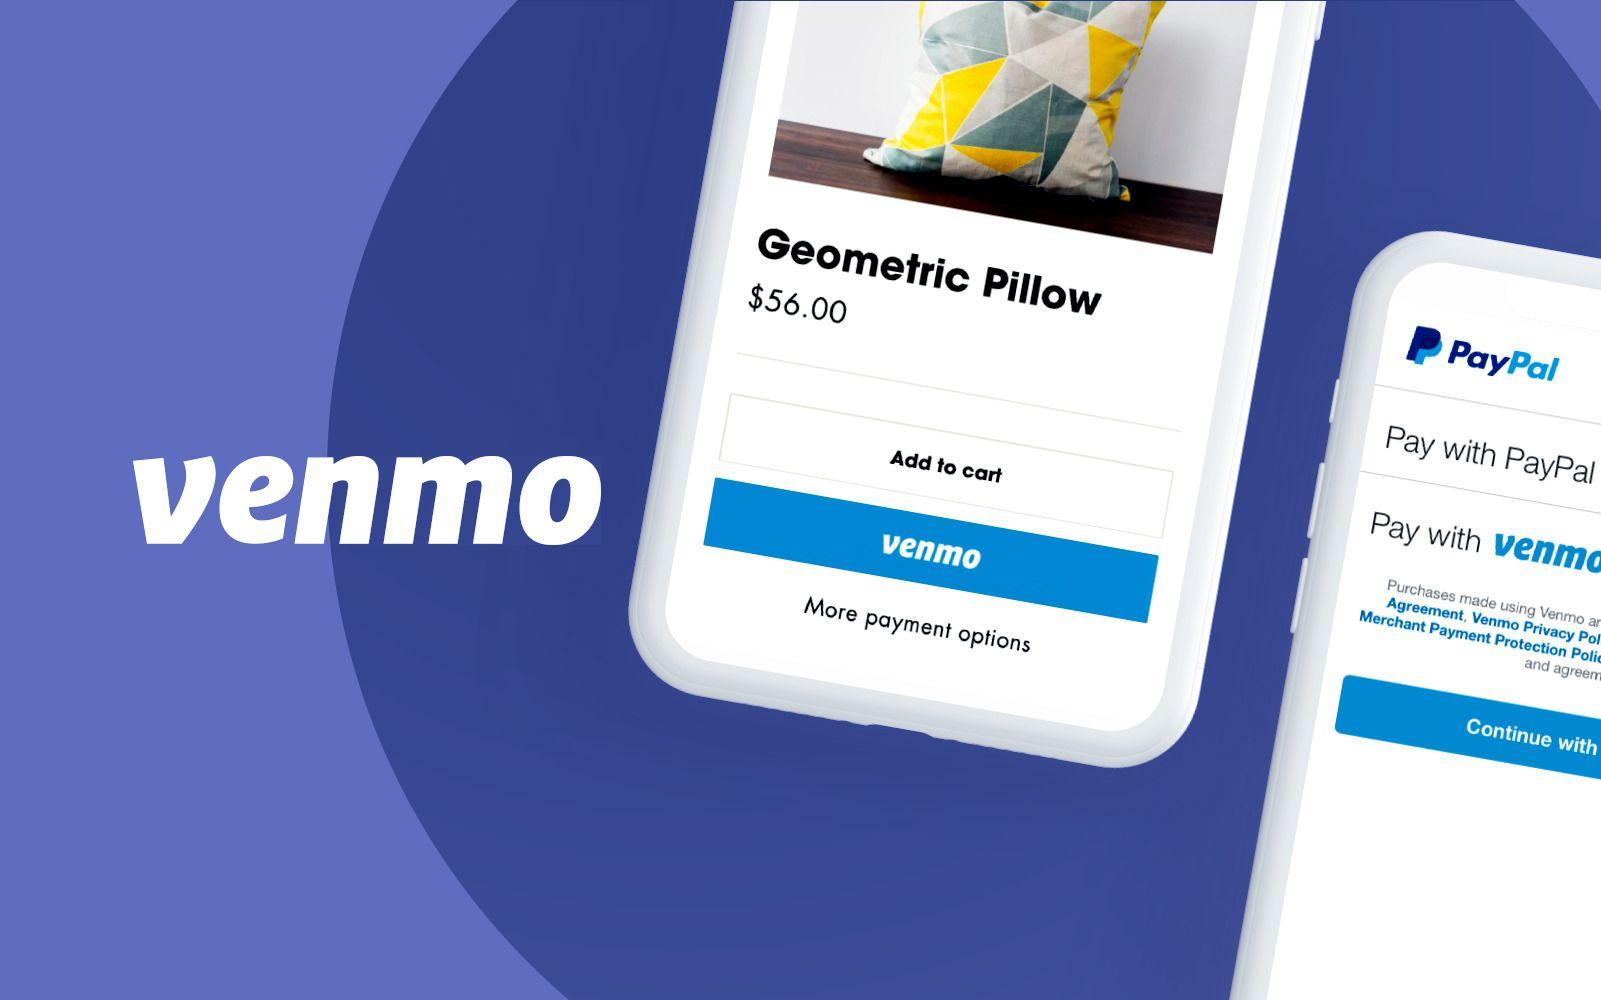 Pay with Venmo Logo - Shopify adds Venmo as a checkout option